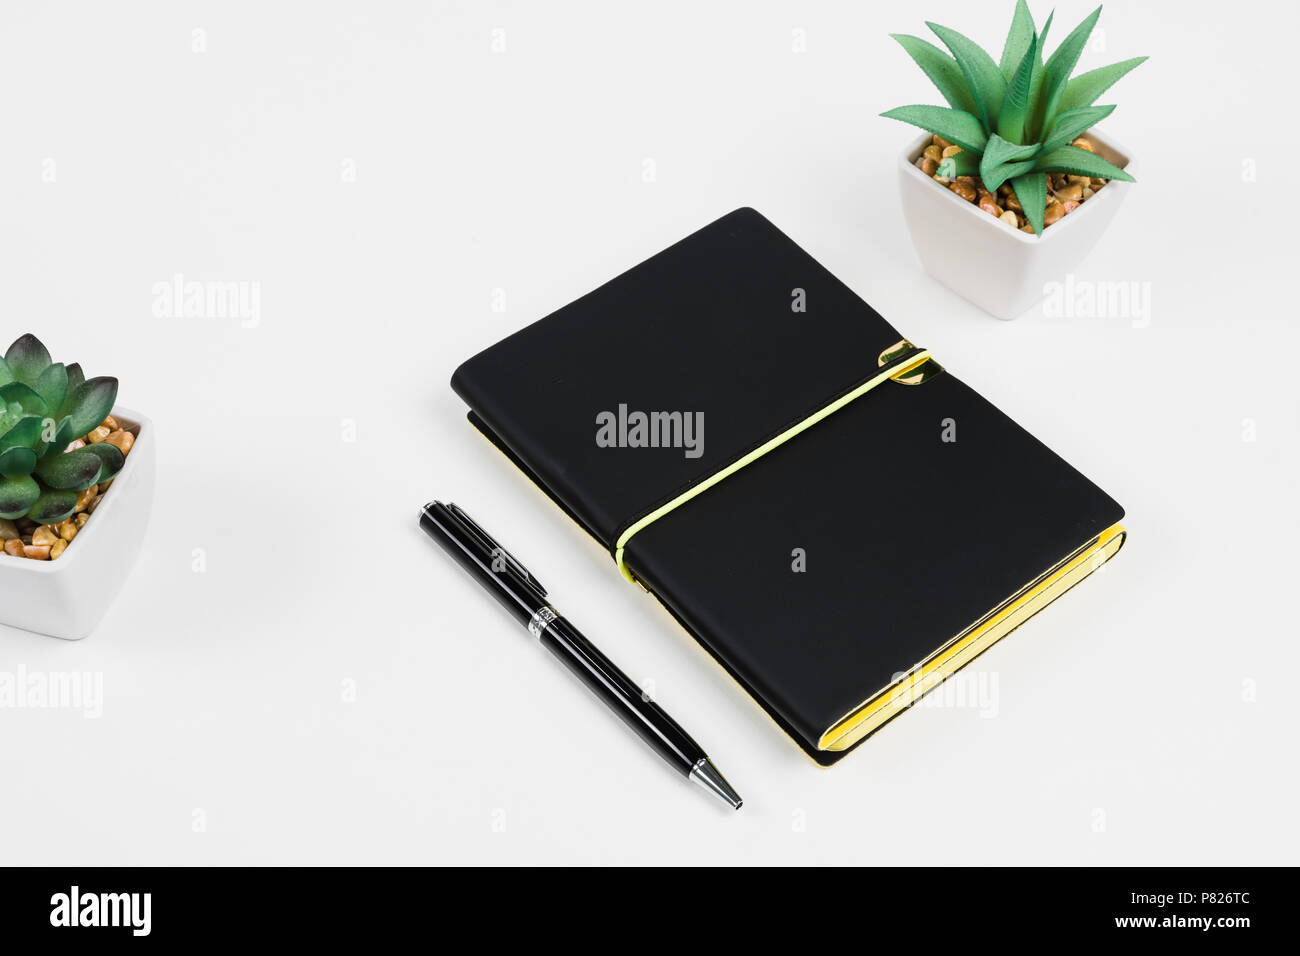 Notebook on Desk with Succulent Plant Stock Photo